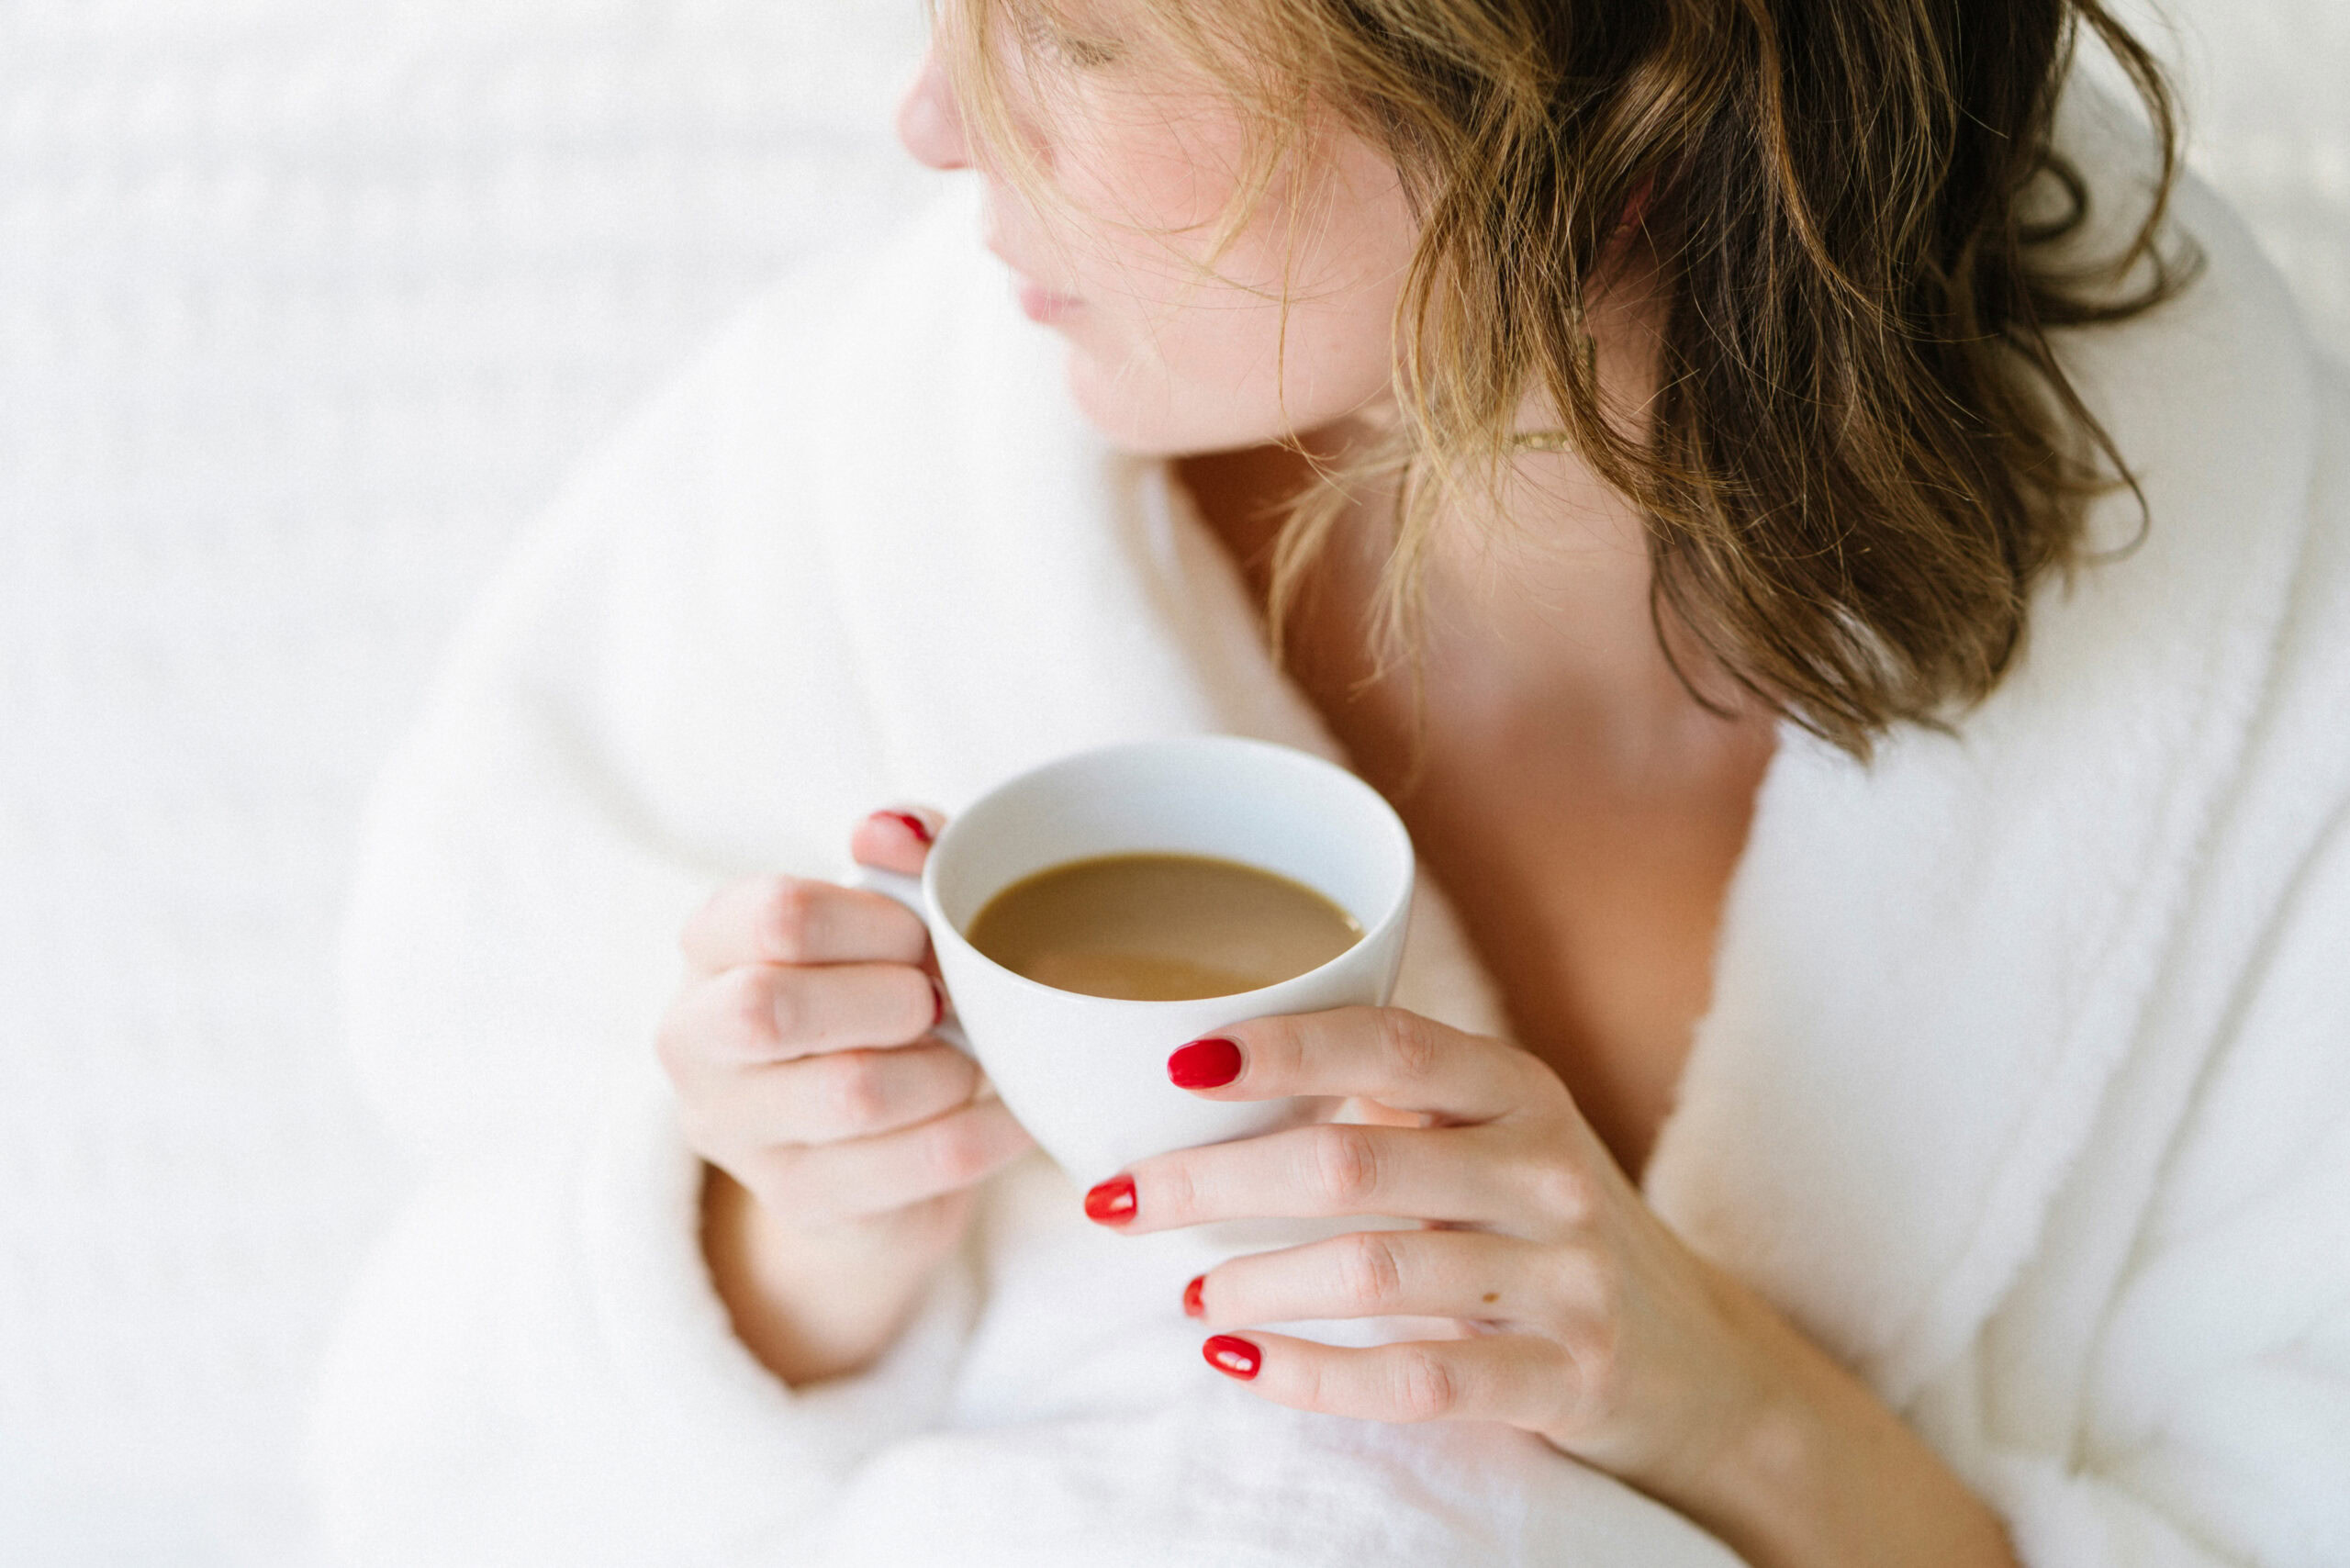 A person with red nail polish holds a white cup of coffee, wearing a white robe, and gazes into the midlife landscape, looking away from the camera.